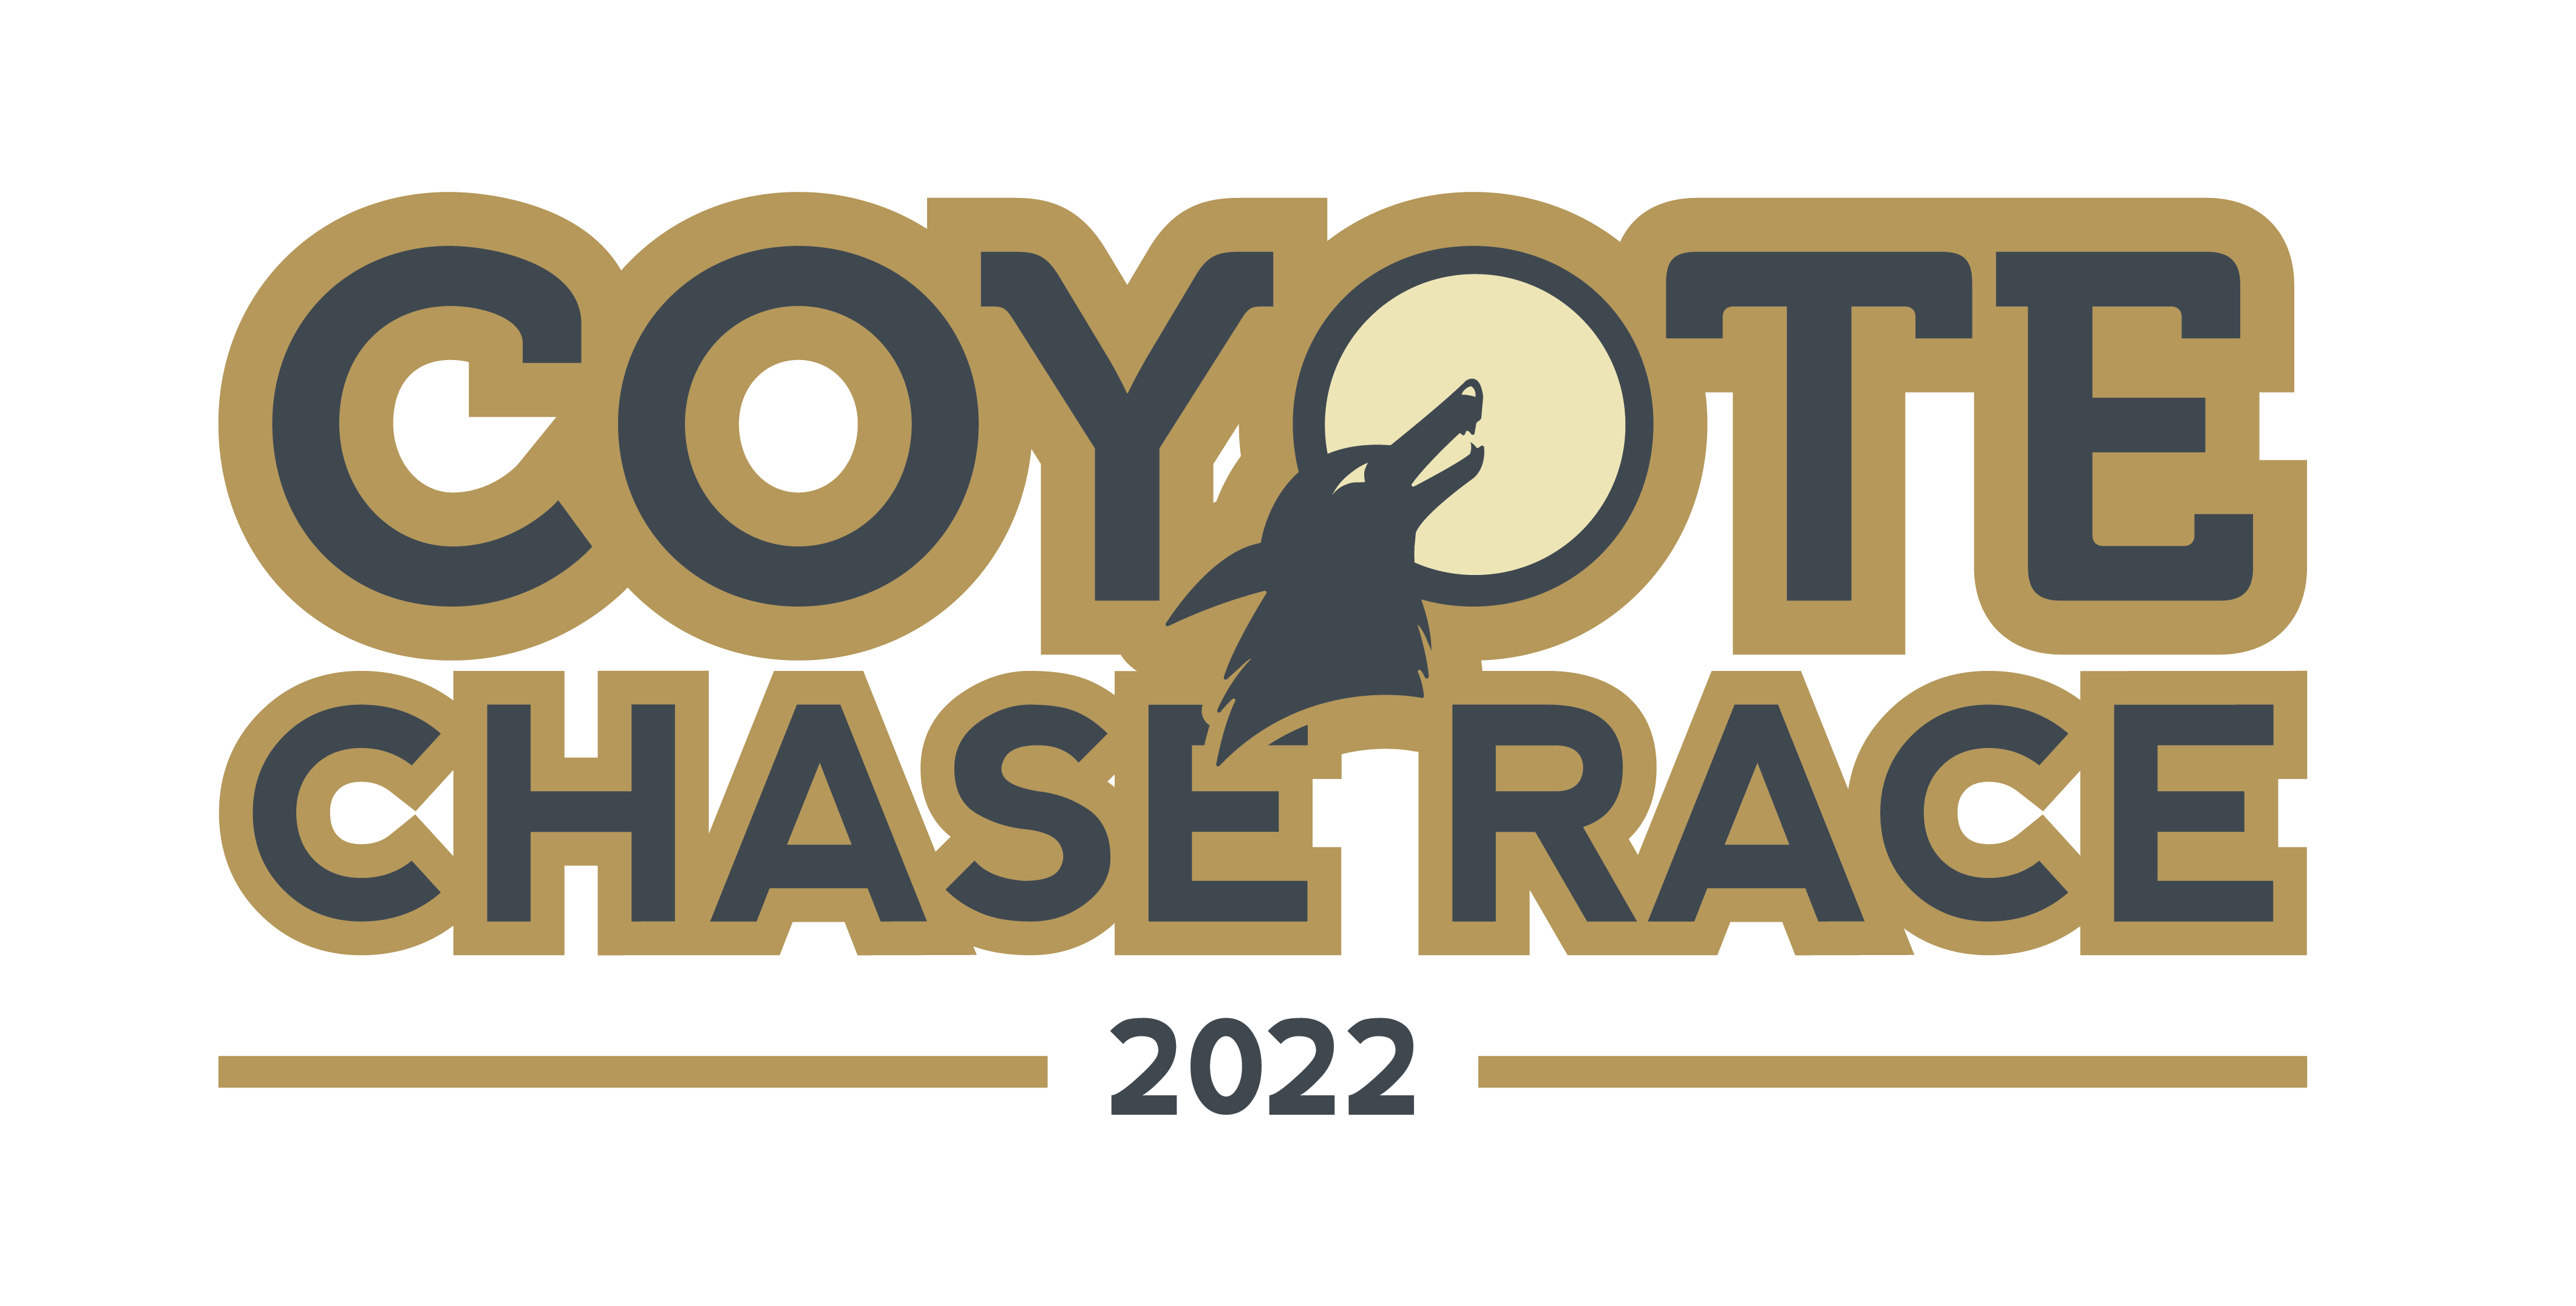 Coyote Chase Race logo